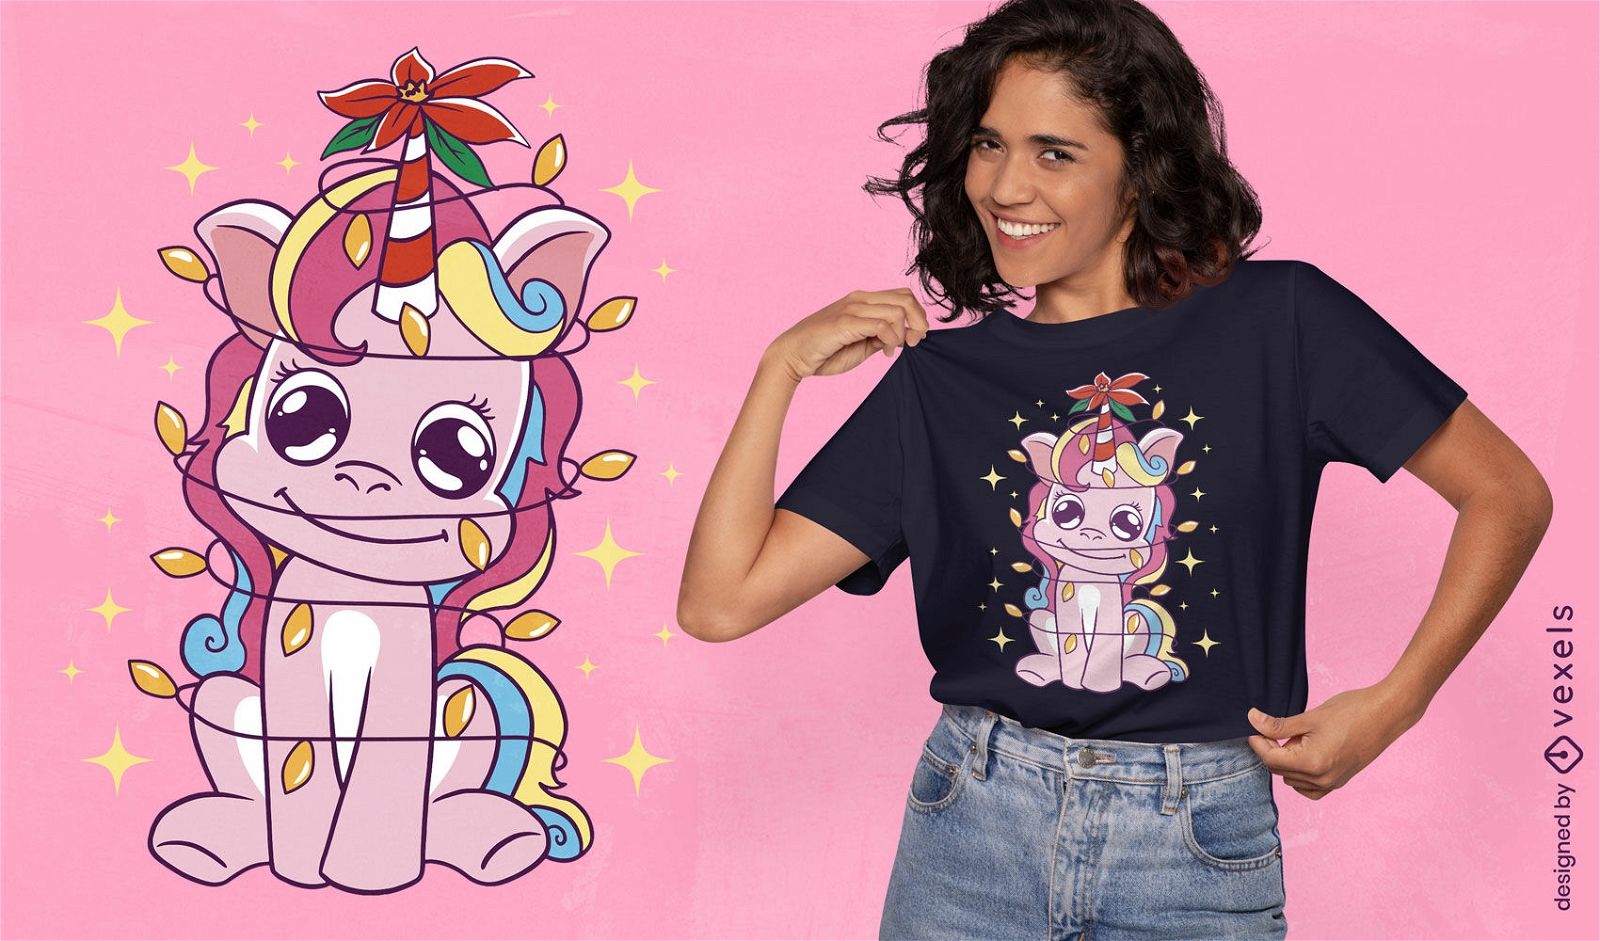 Unicorn wrapped in christmas lights t-shirt design